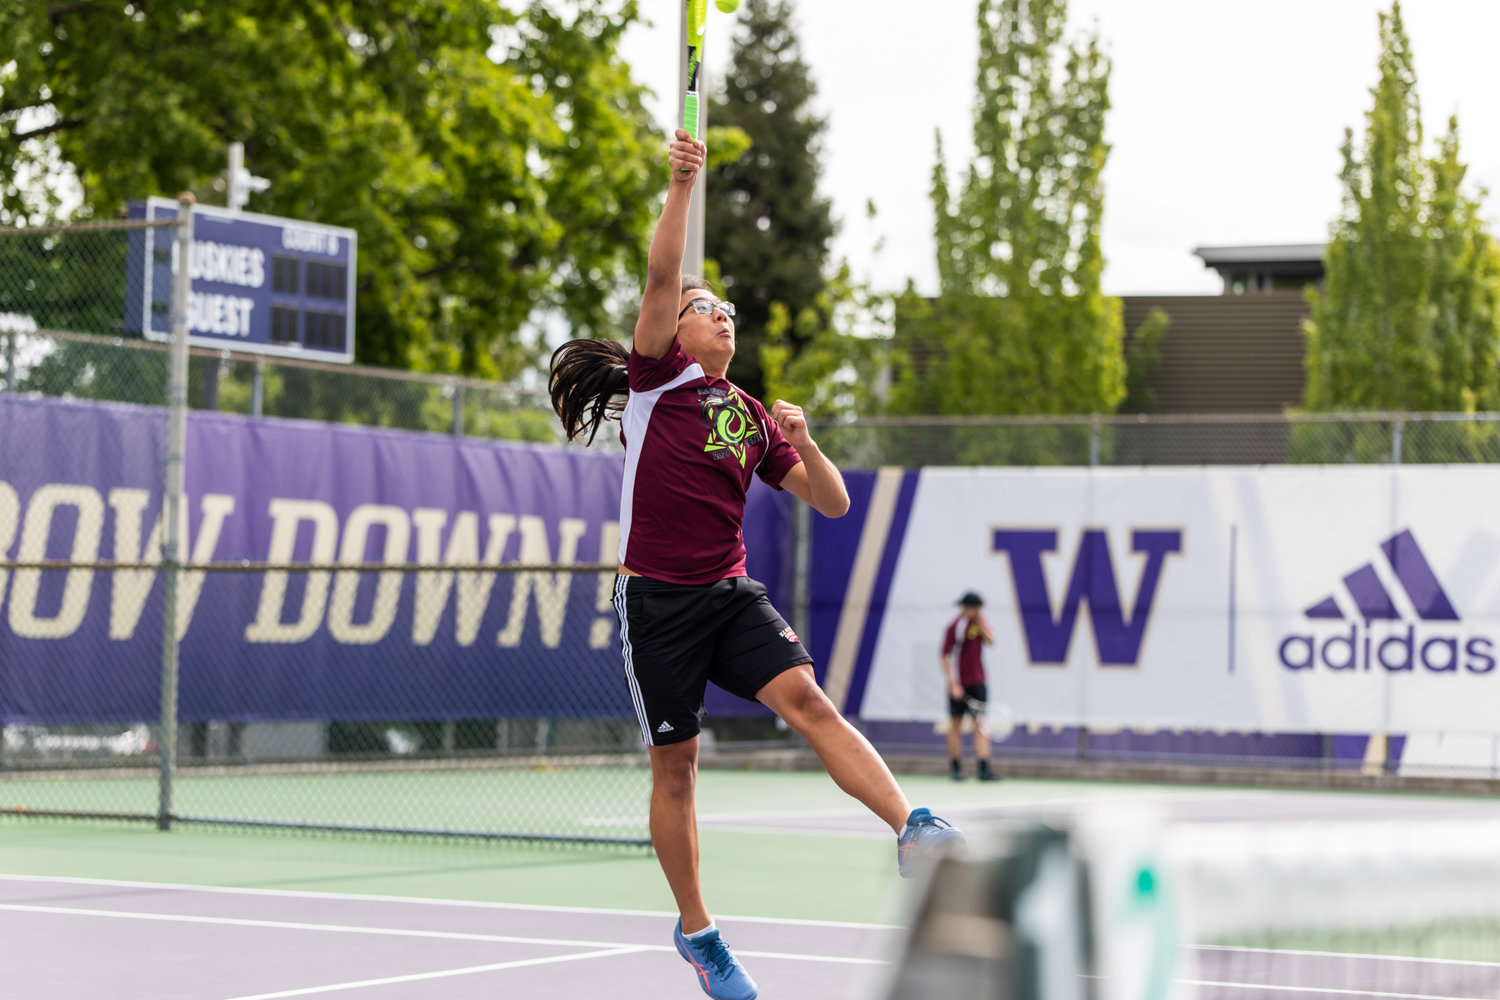 W.F. West's Joseph Chung stretches tall to reach the ball during the first set of the 2A boys' doubles tennis state competition on May 27, 2022.